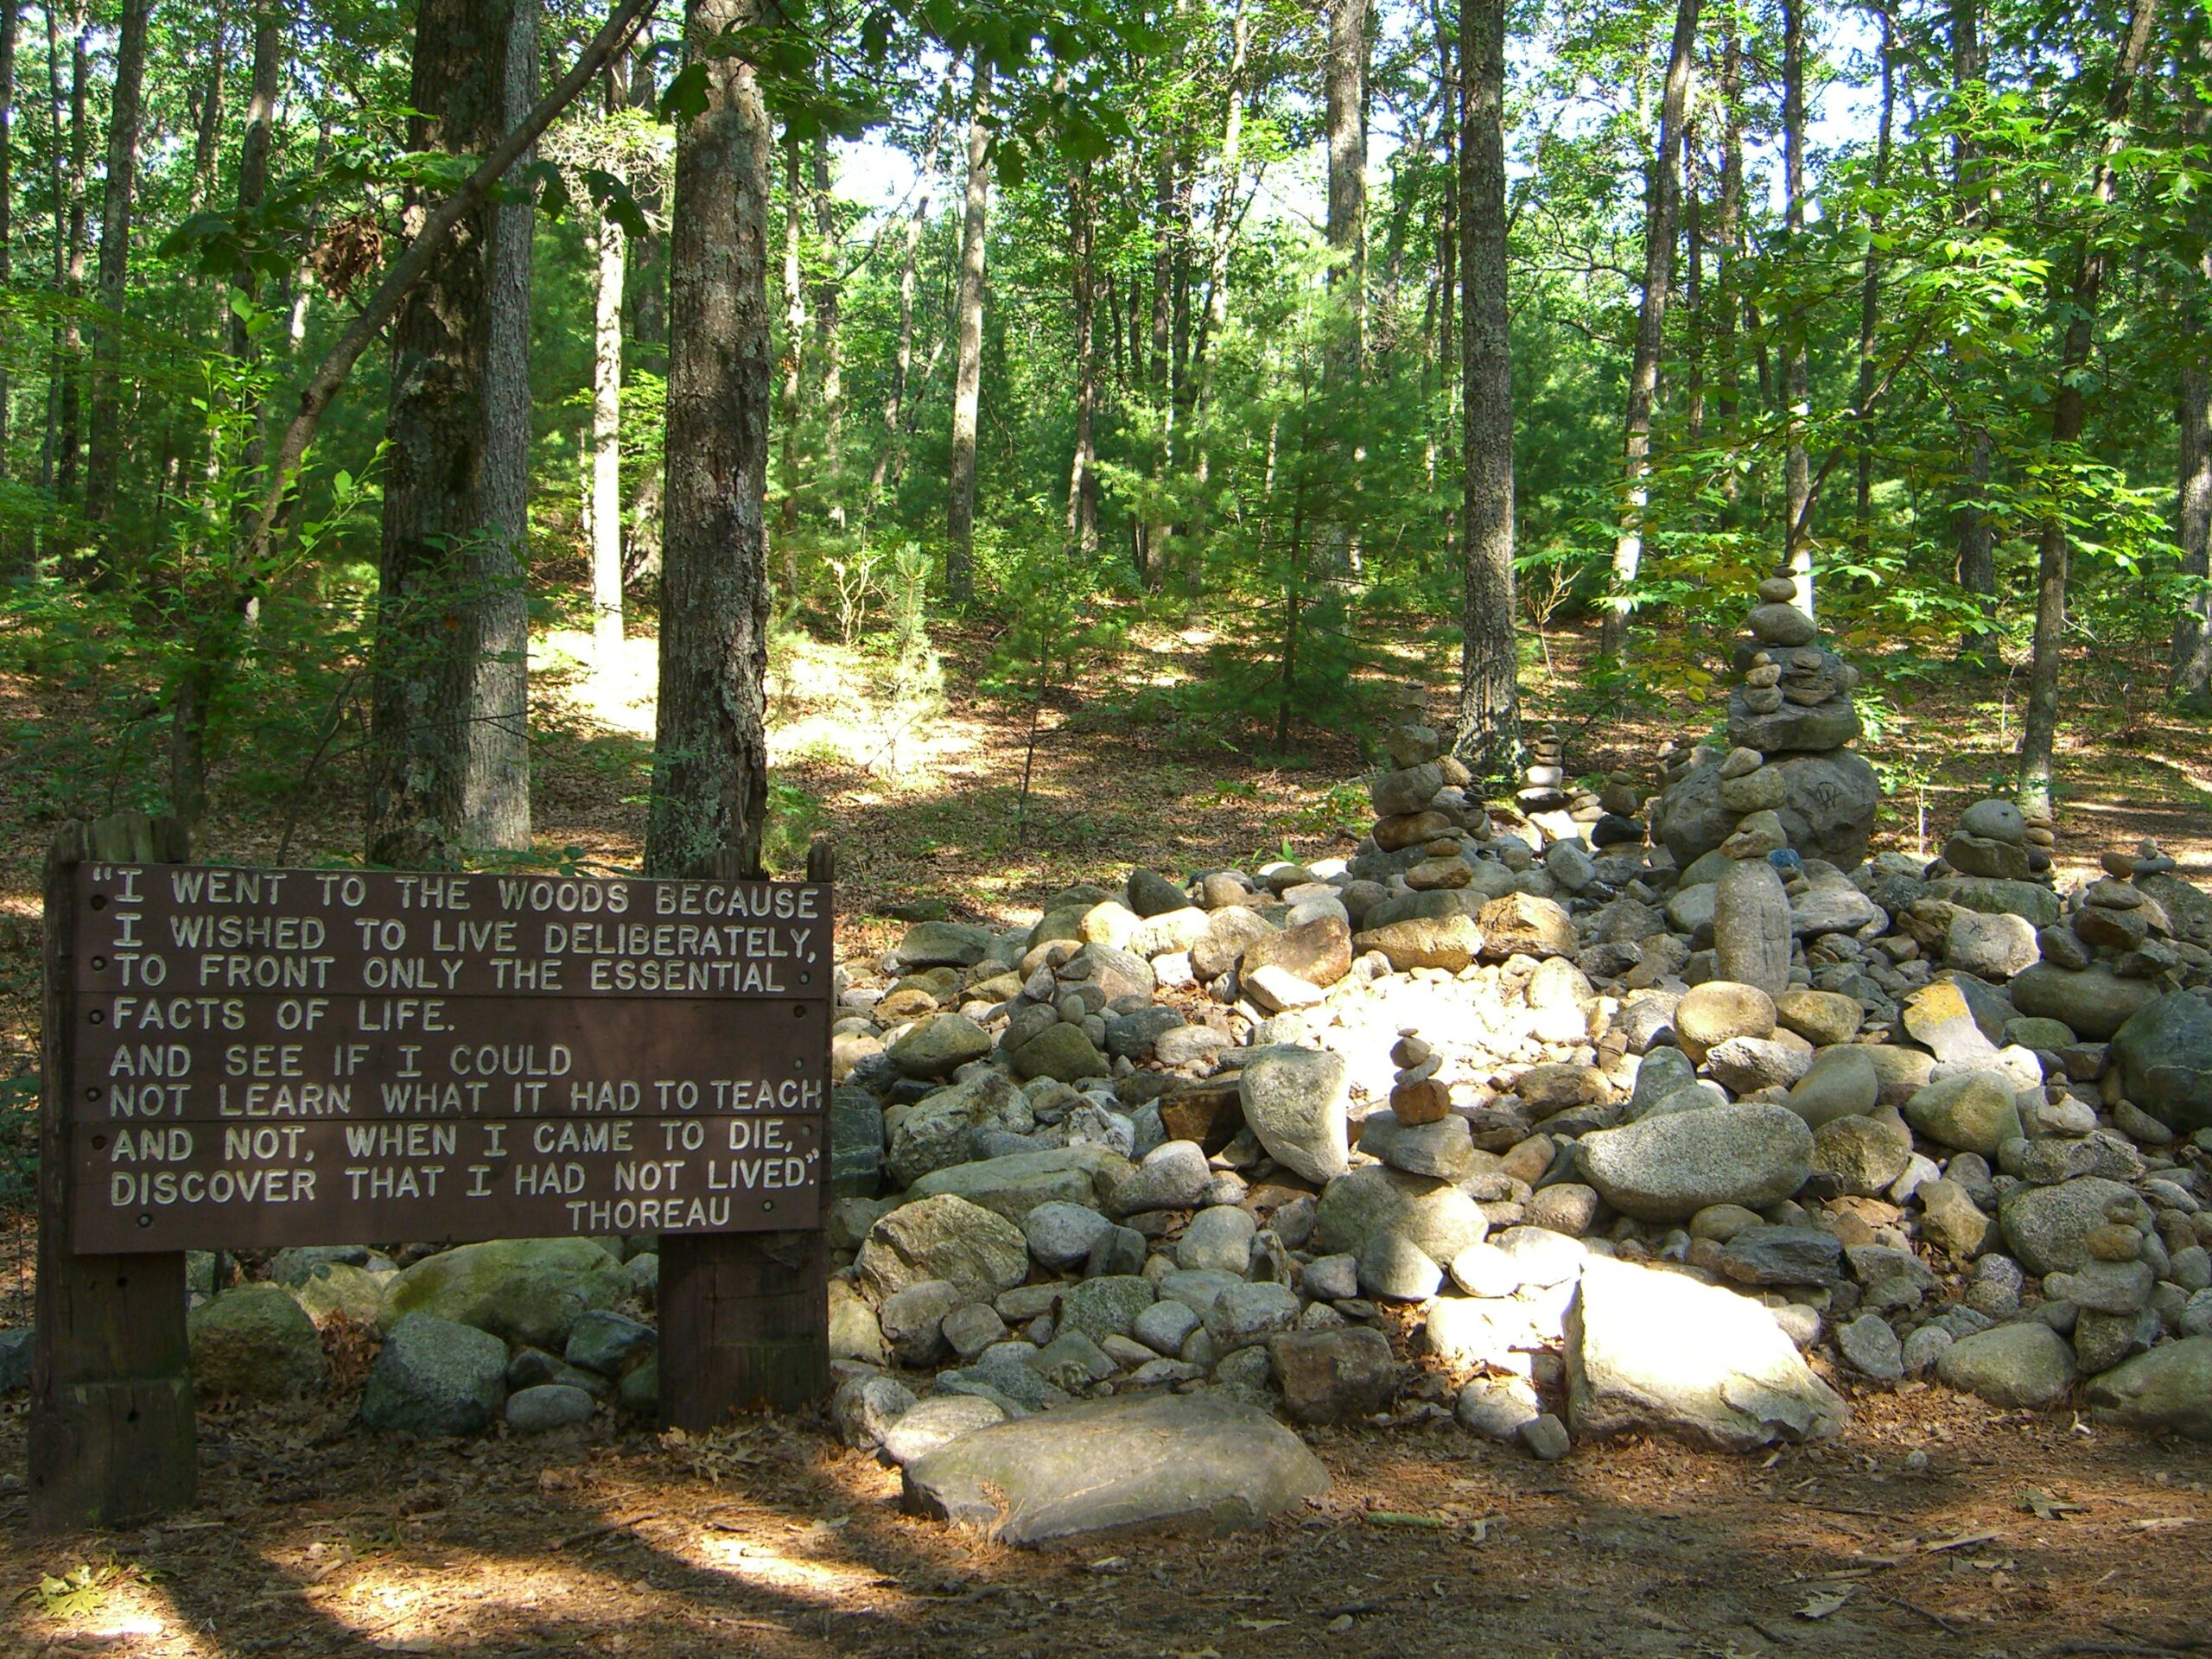 A sign serving as a tribute to Thoreau stands in the forest near Walden Pond.